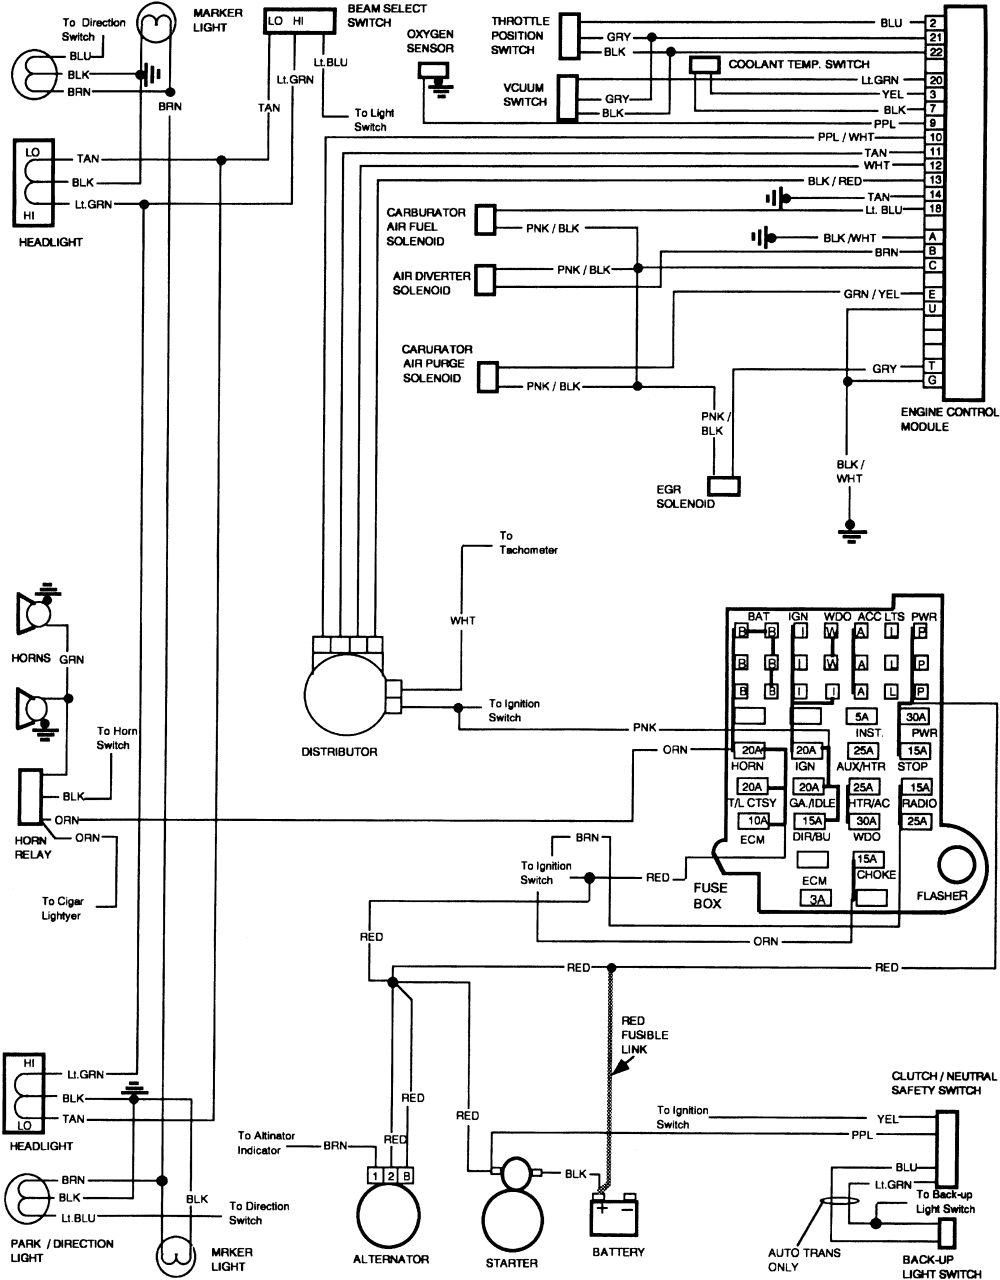 Need wiring diagram for an '85 Chevy C30 Siverado truck